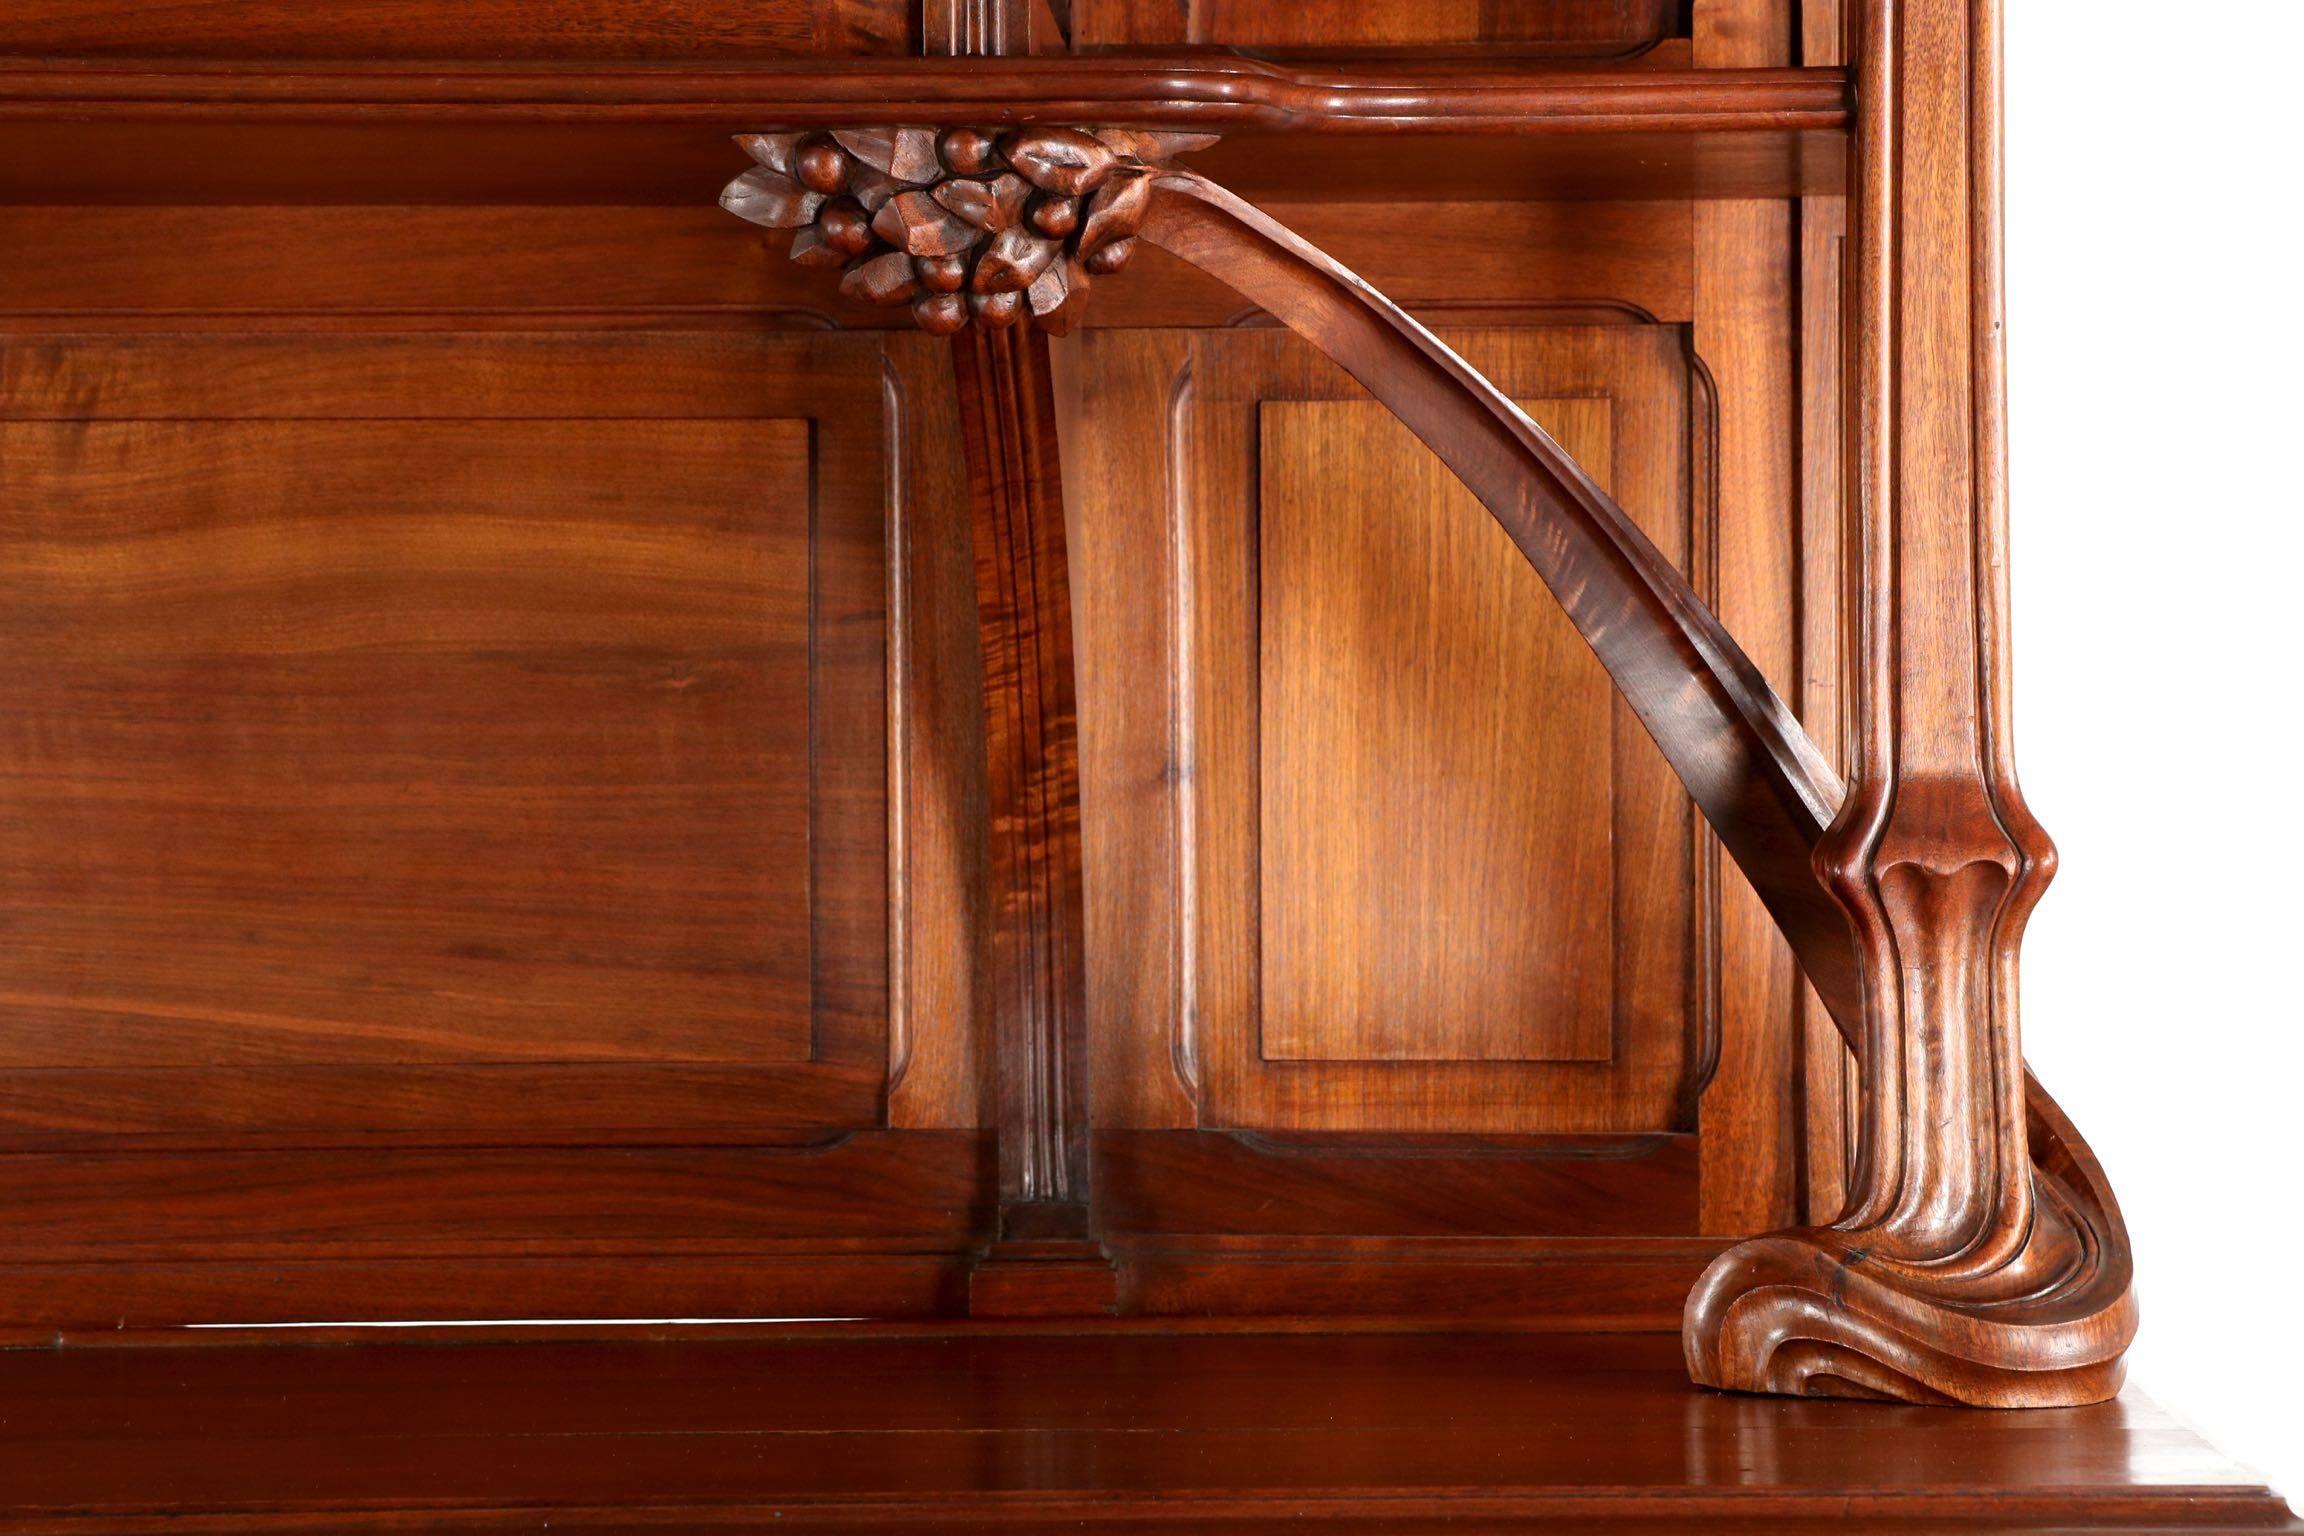 Early 20th Century French Art Nouveau Finely Carved Walnut Buffet Display Cabinet, circa 1900